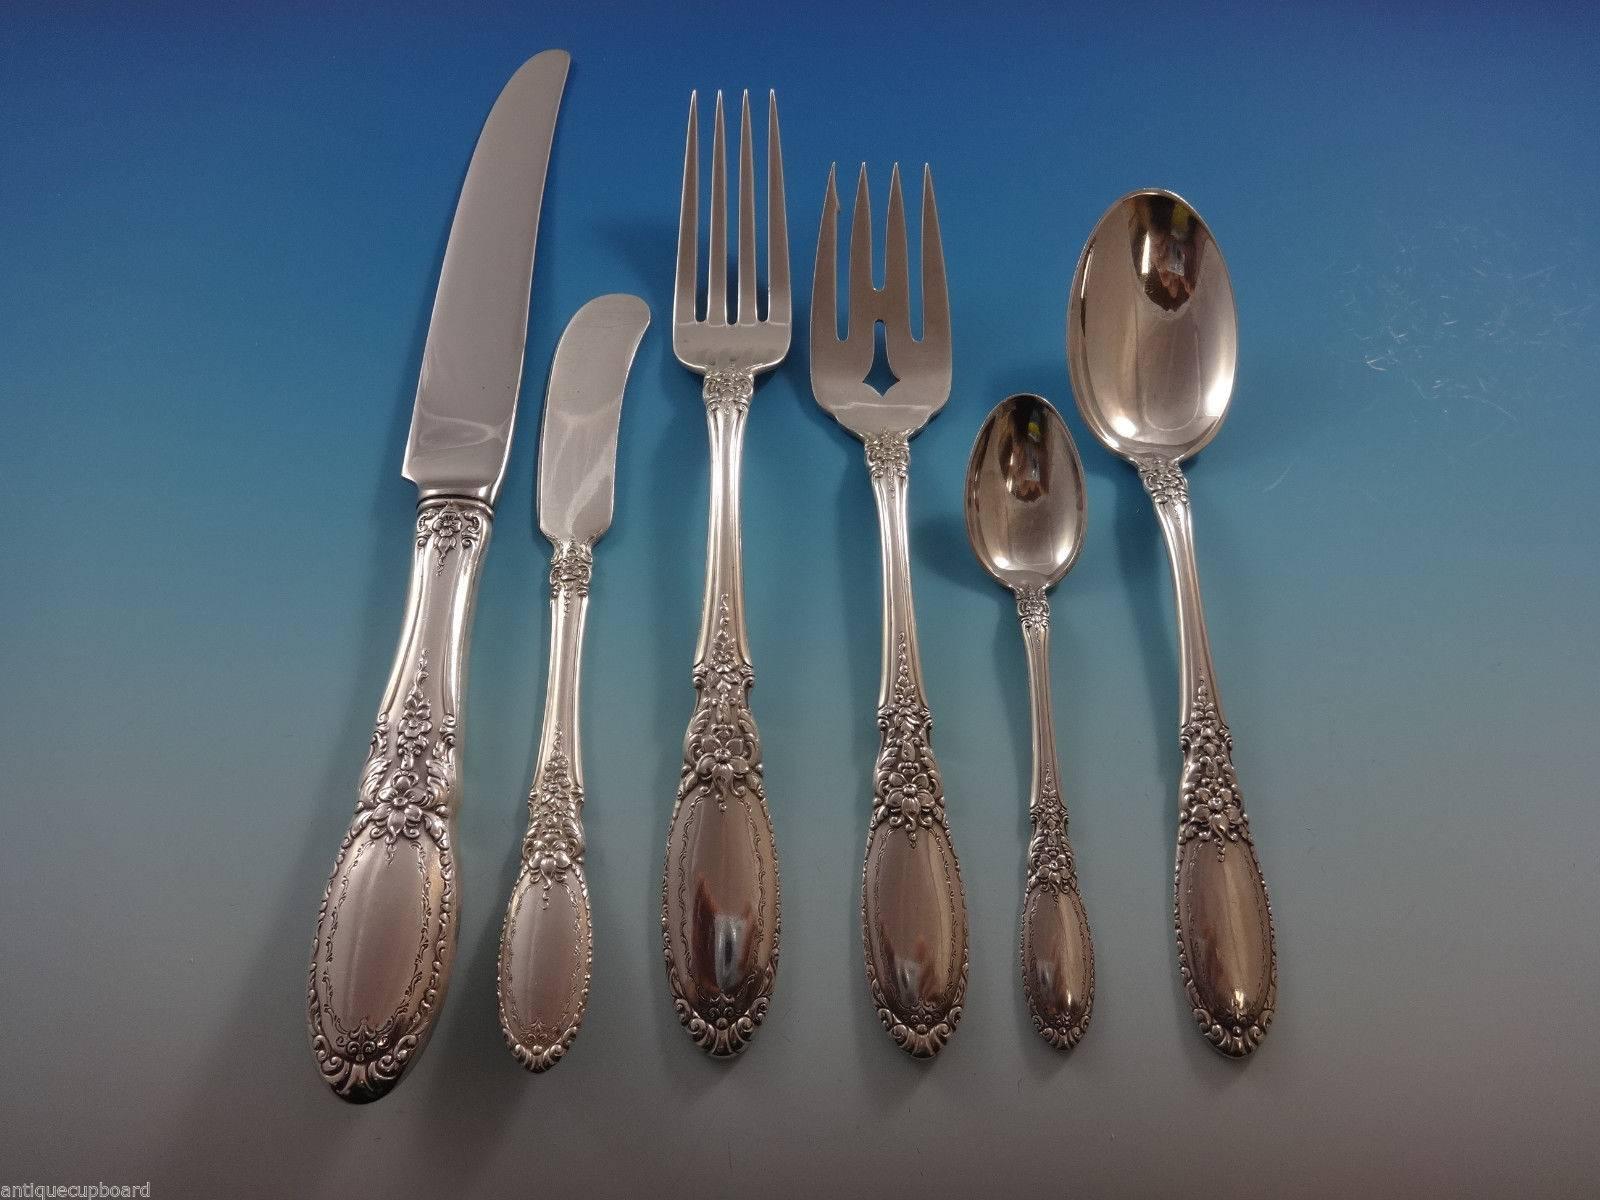 Old mirror by Towle sterling silver flatware set - 52 pieces. This set includes:

Eight knives, 8 7/8